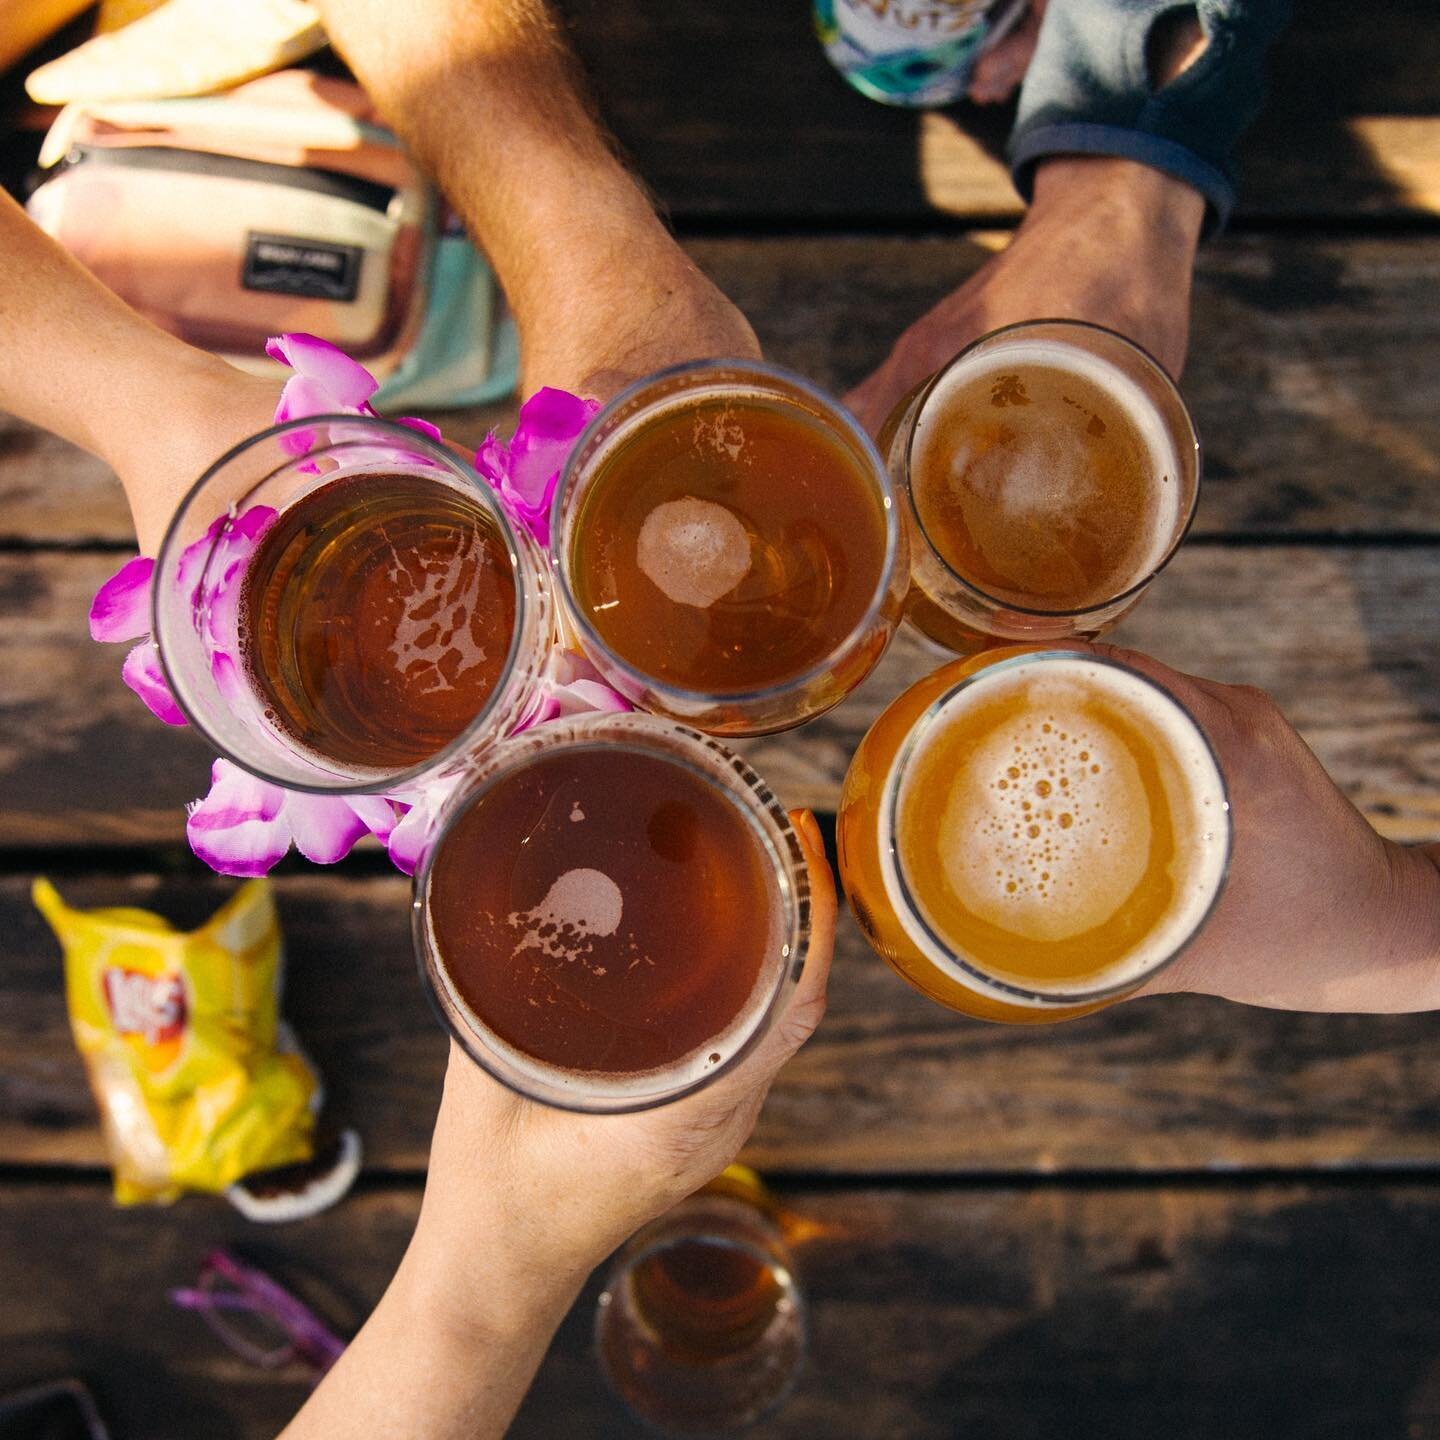 Sun is shinin&rsquo;, beer is pourin&rsquo;! It&rsquo;s time for outdoor pints at the pub 🍻 

Happy National Beer Day!
.
.
.

#NationalBeerDay #StormcloudBrewing #MichiganBeer #MichiganCraftBeer #GreatBeerState #CraftBeer #CraftBeerLove #DrinkMiBeer